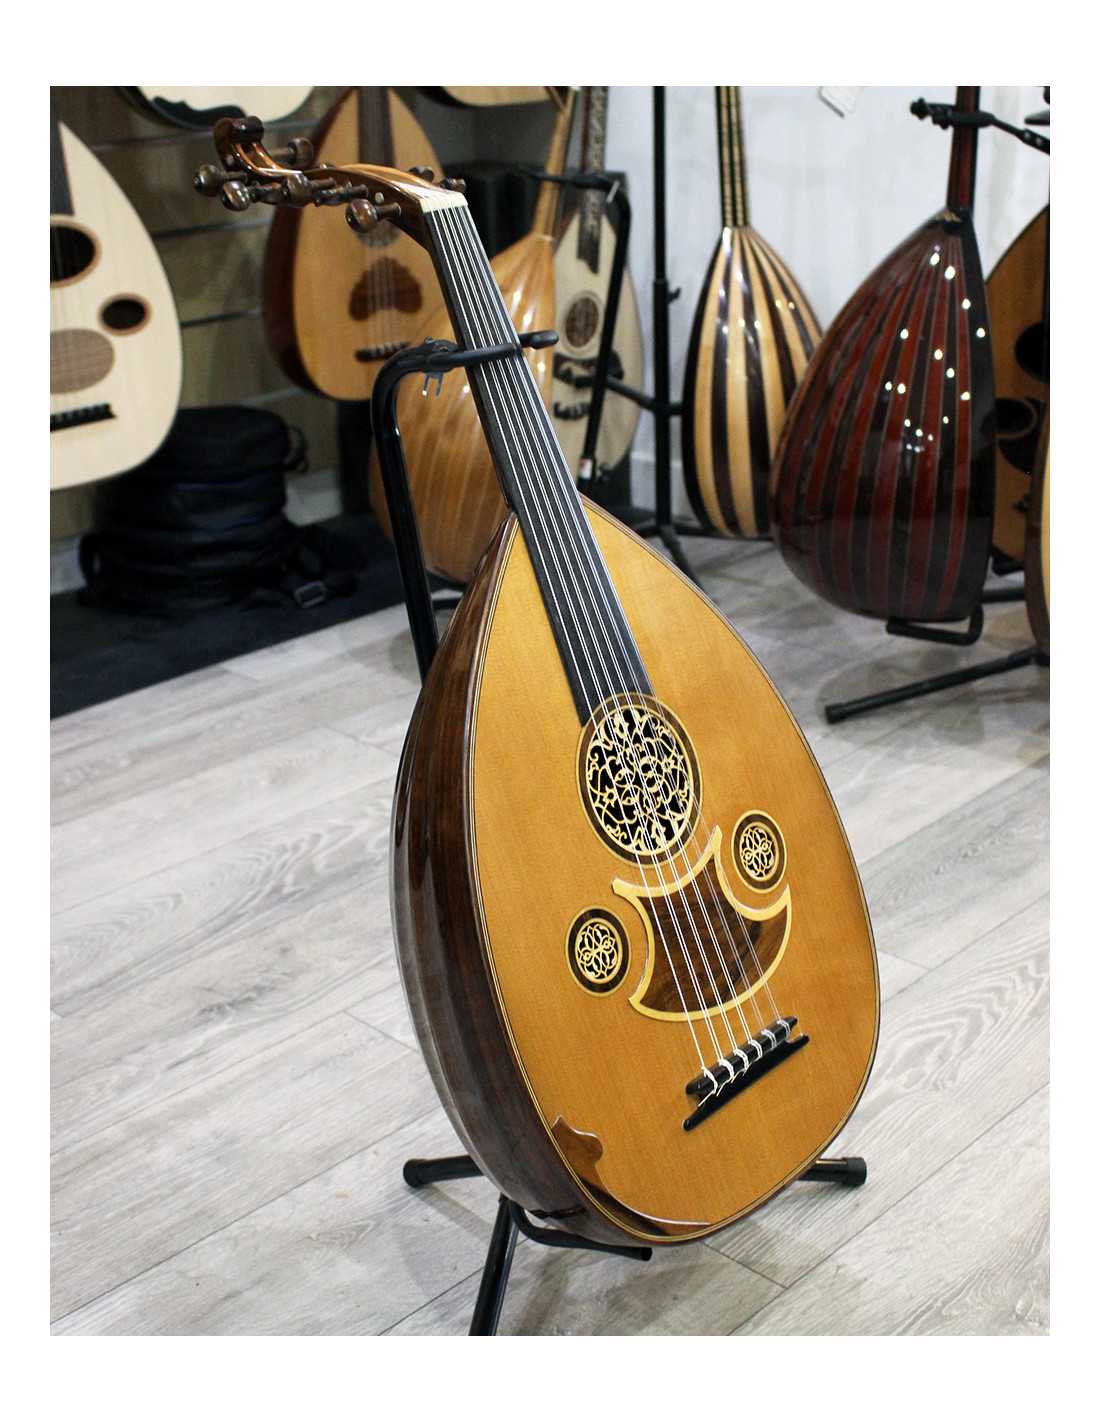 Oud - Persian Instrument Made by Said - Safa Music